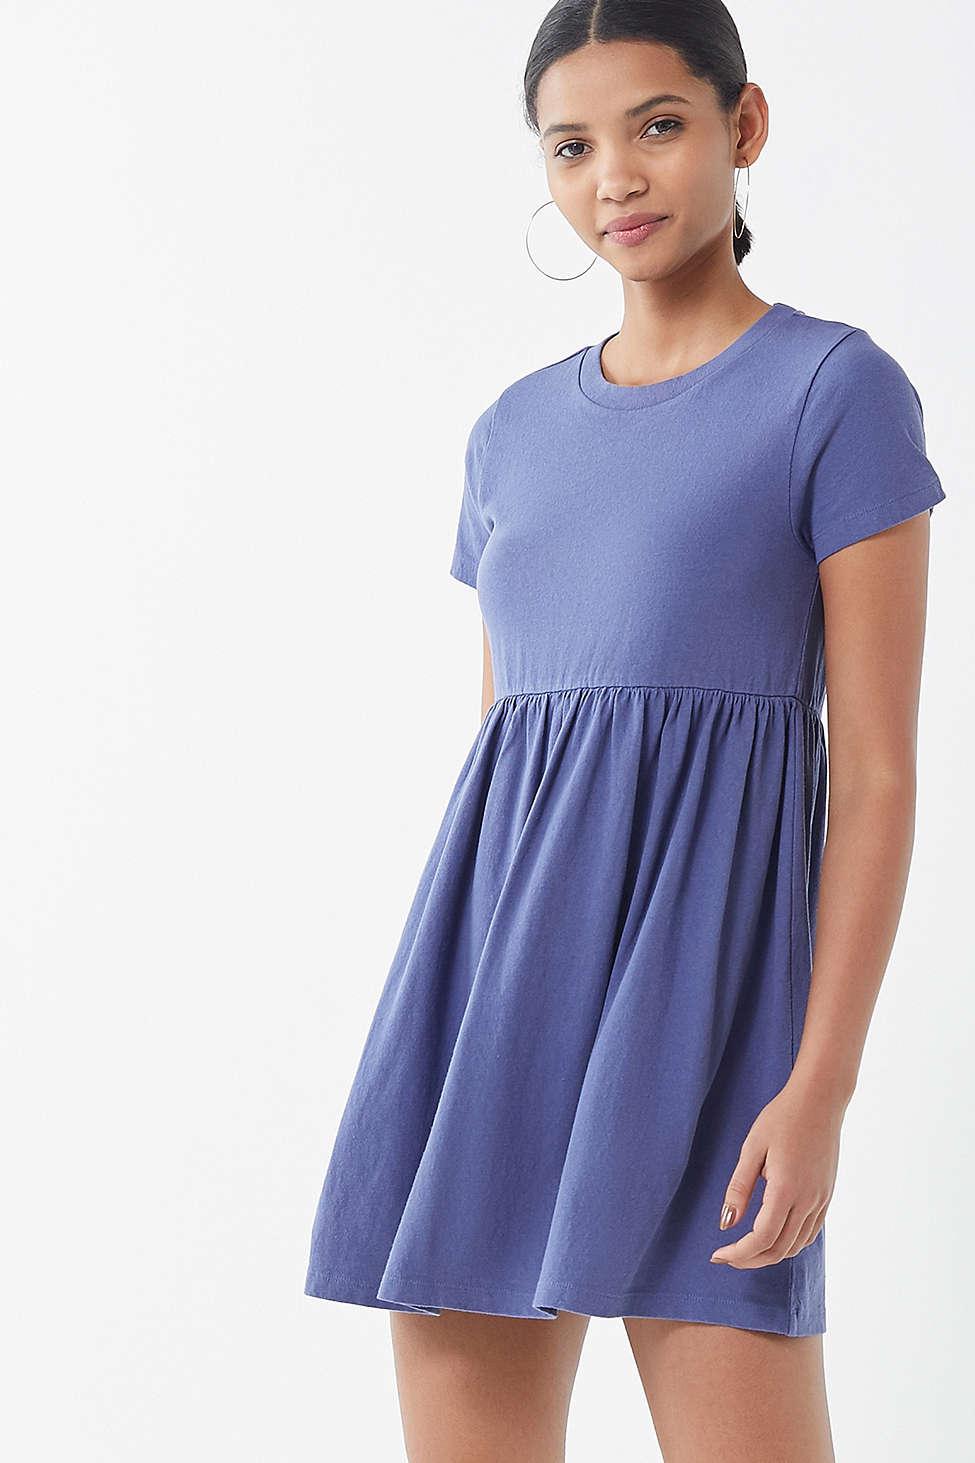 Urban Outfitters Uo Alexa Babydoll T-shirt Dress in Blue